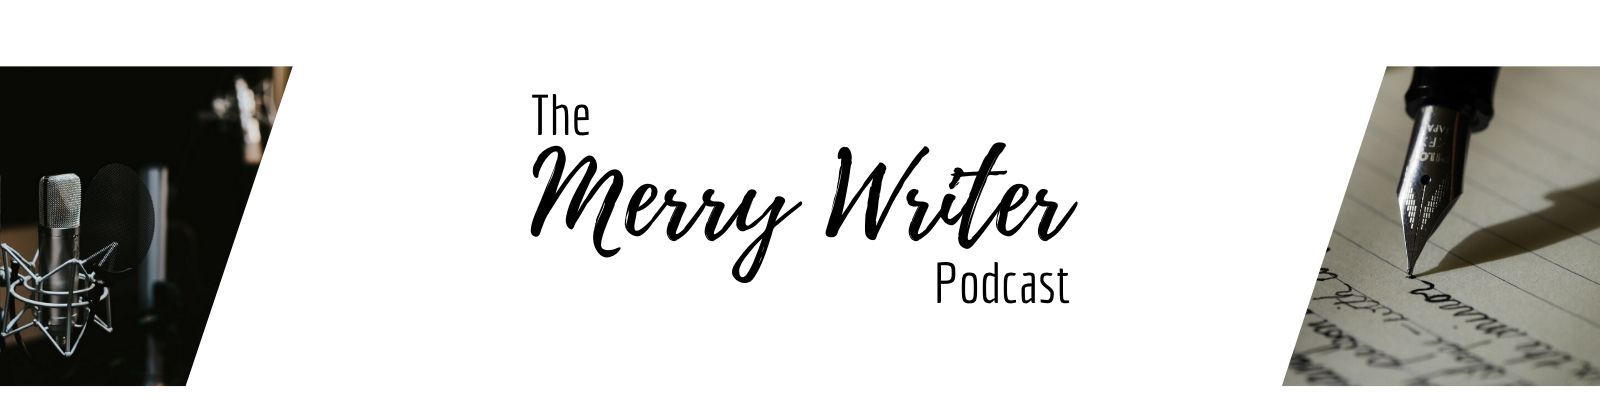 The Merry Writer Podcast for writers and authors